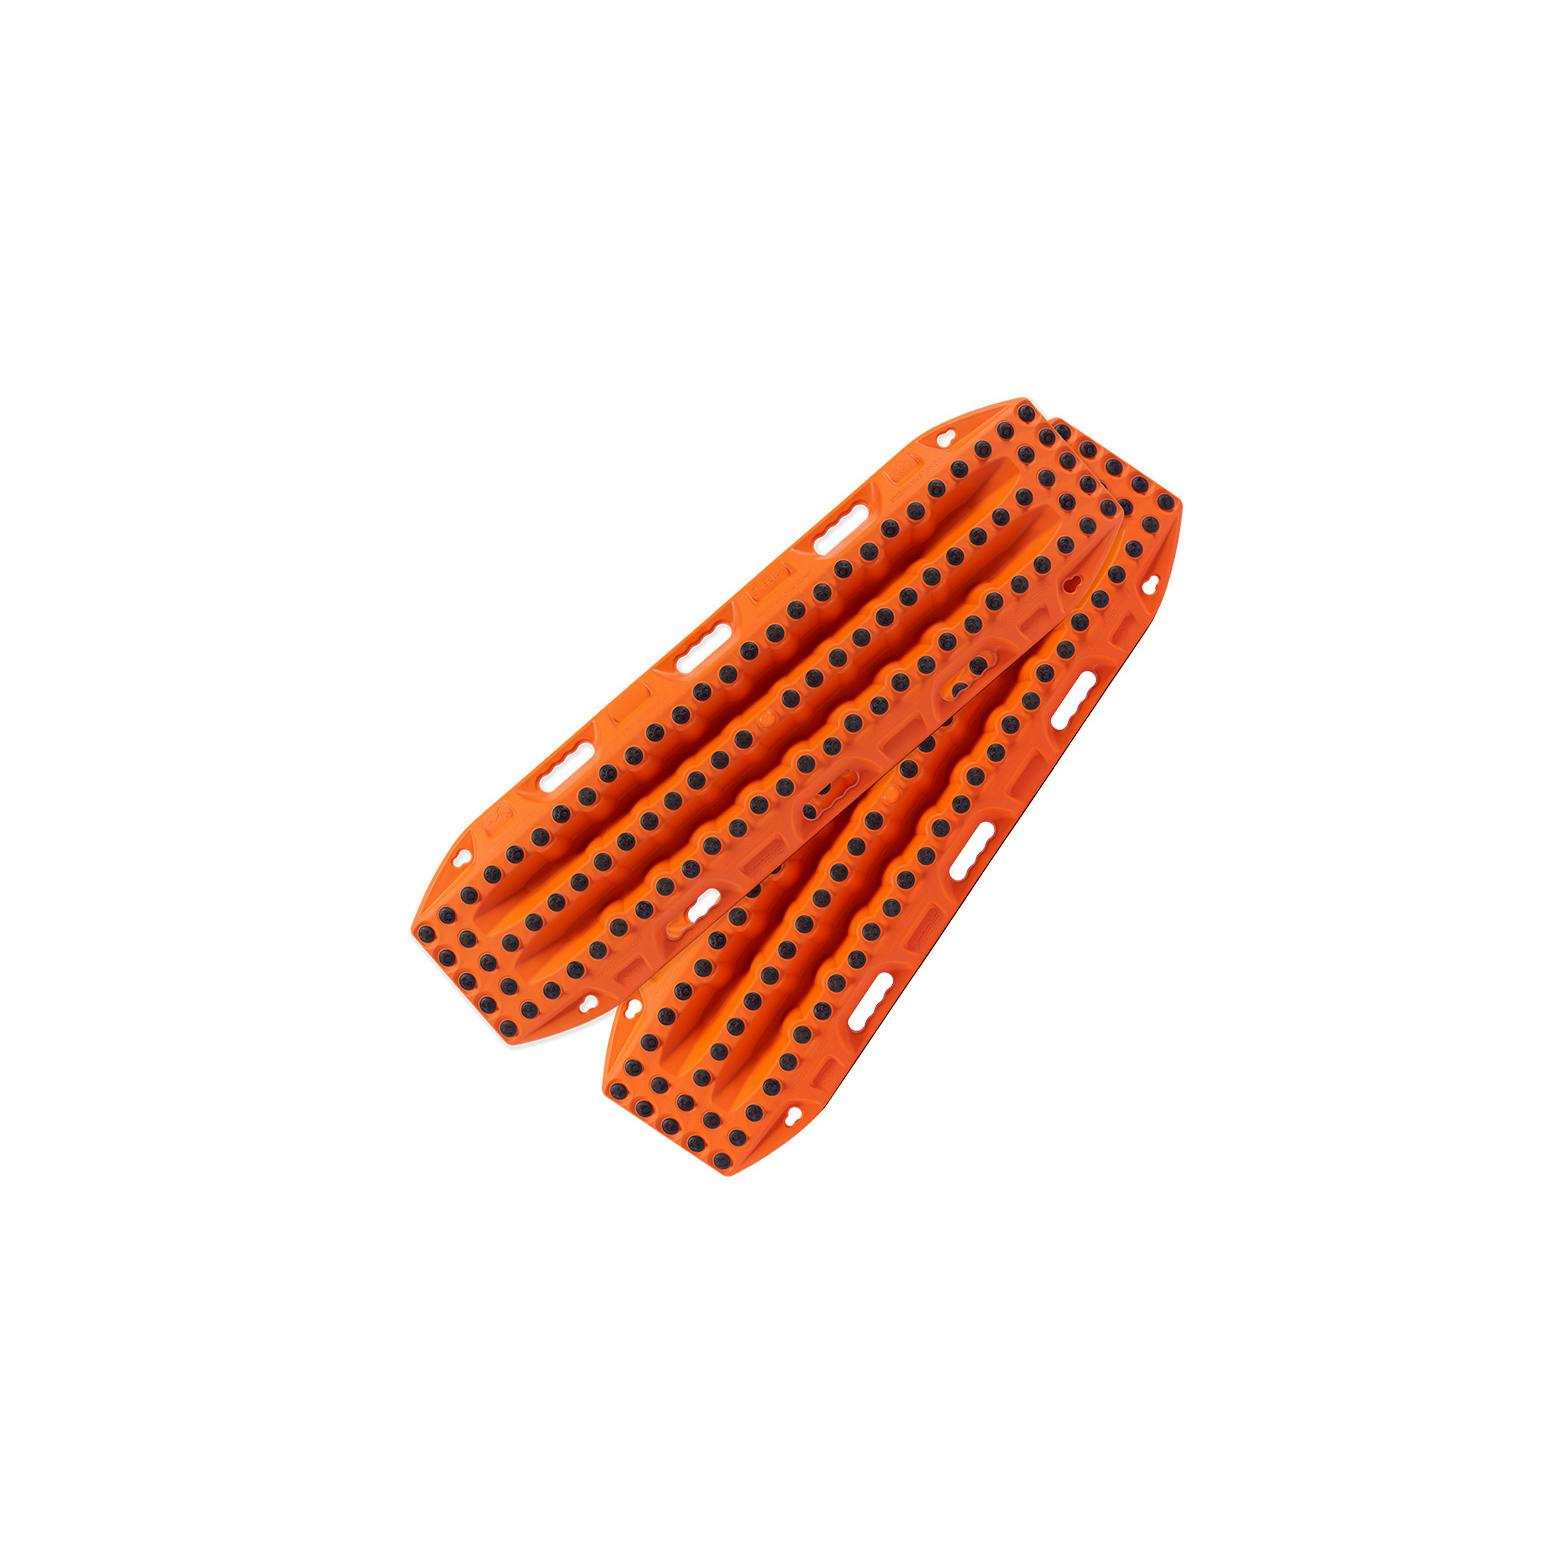 Maxtrax XTREME Signature Orange recovery boards on white background